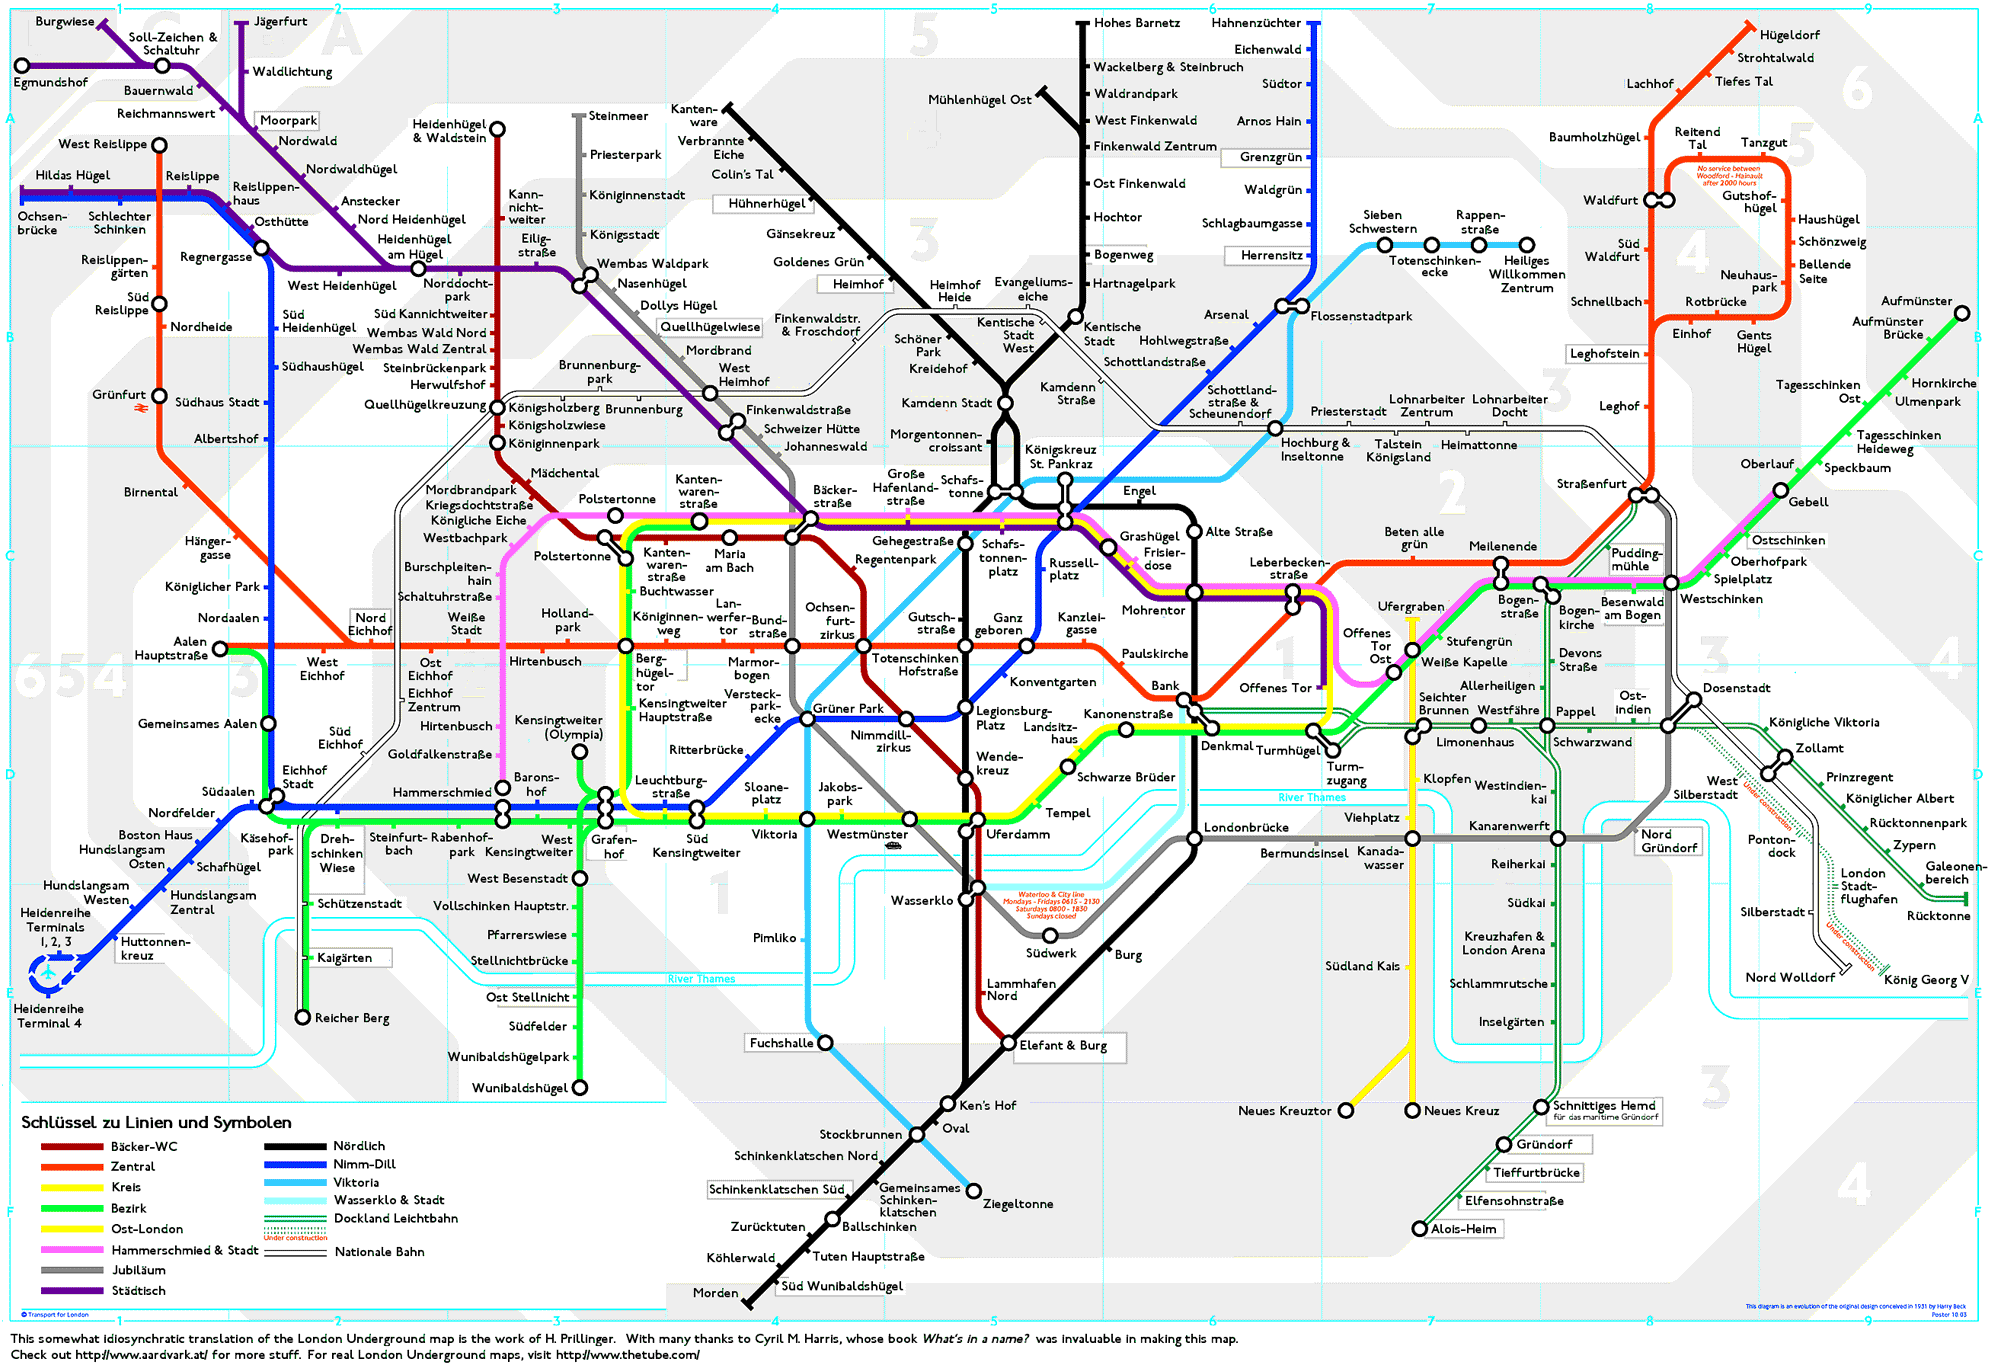 London Underground Map translated into German by Horst Prillinger. All rights reserved. Commercial use prohibited.